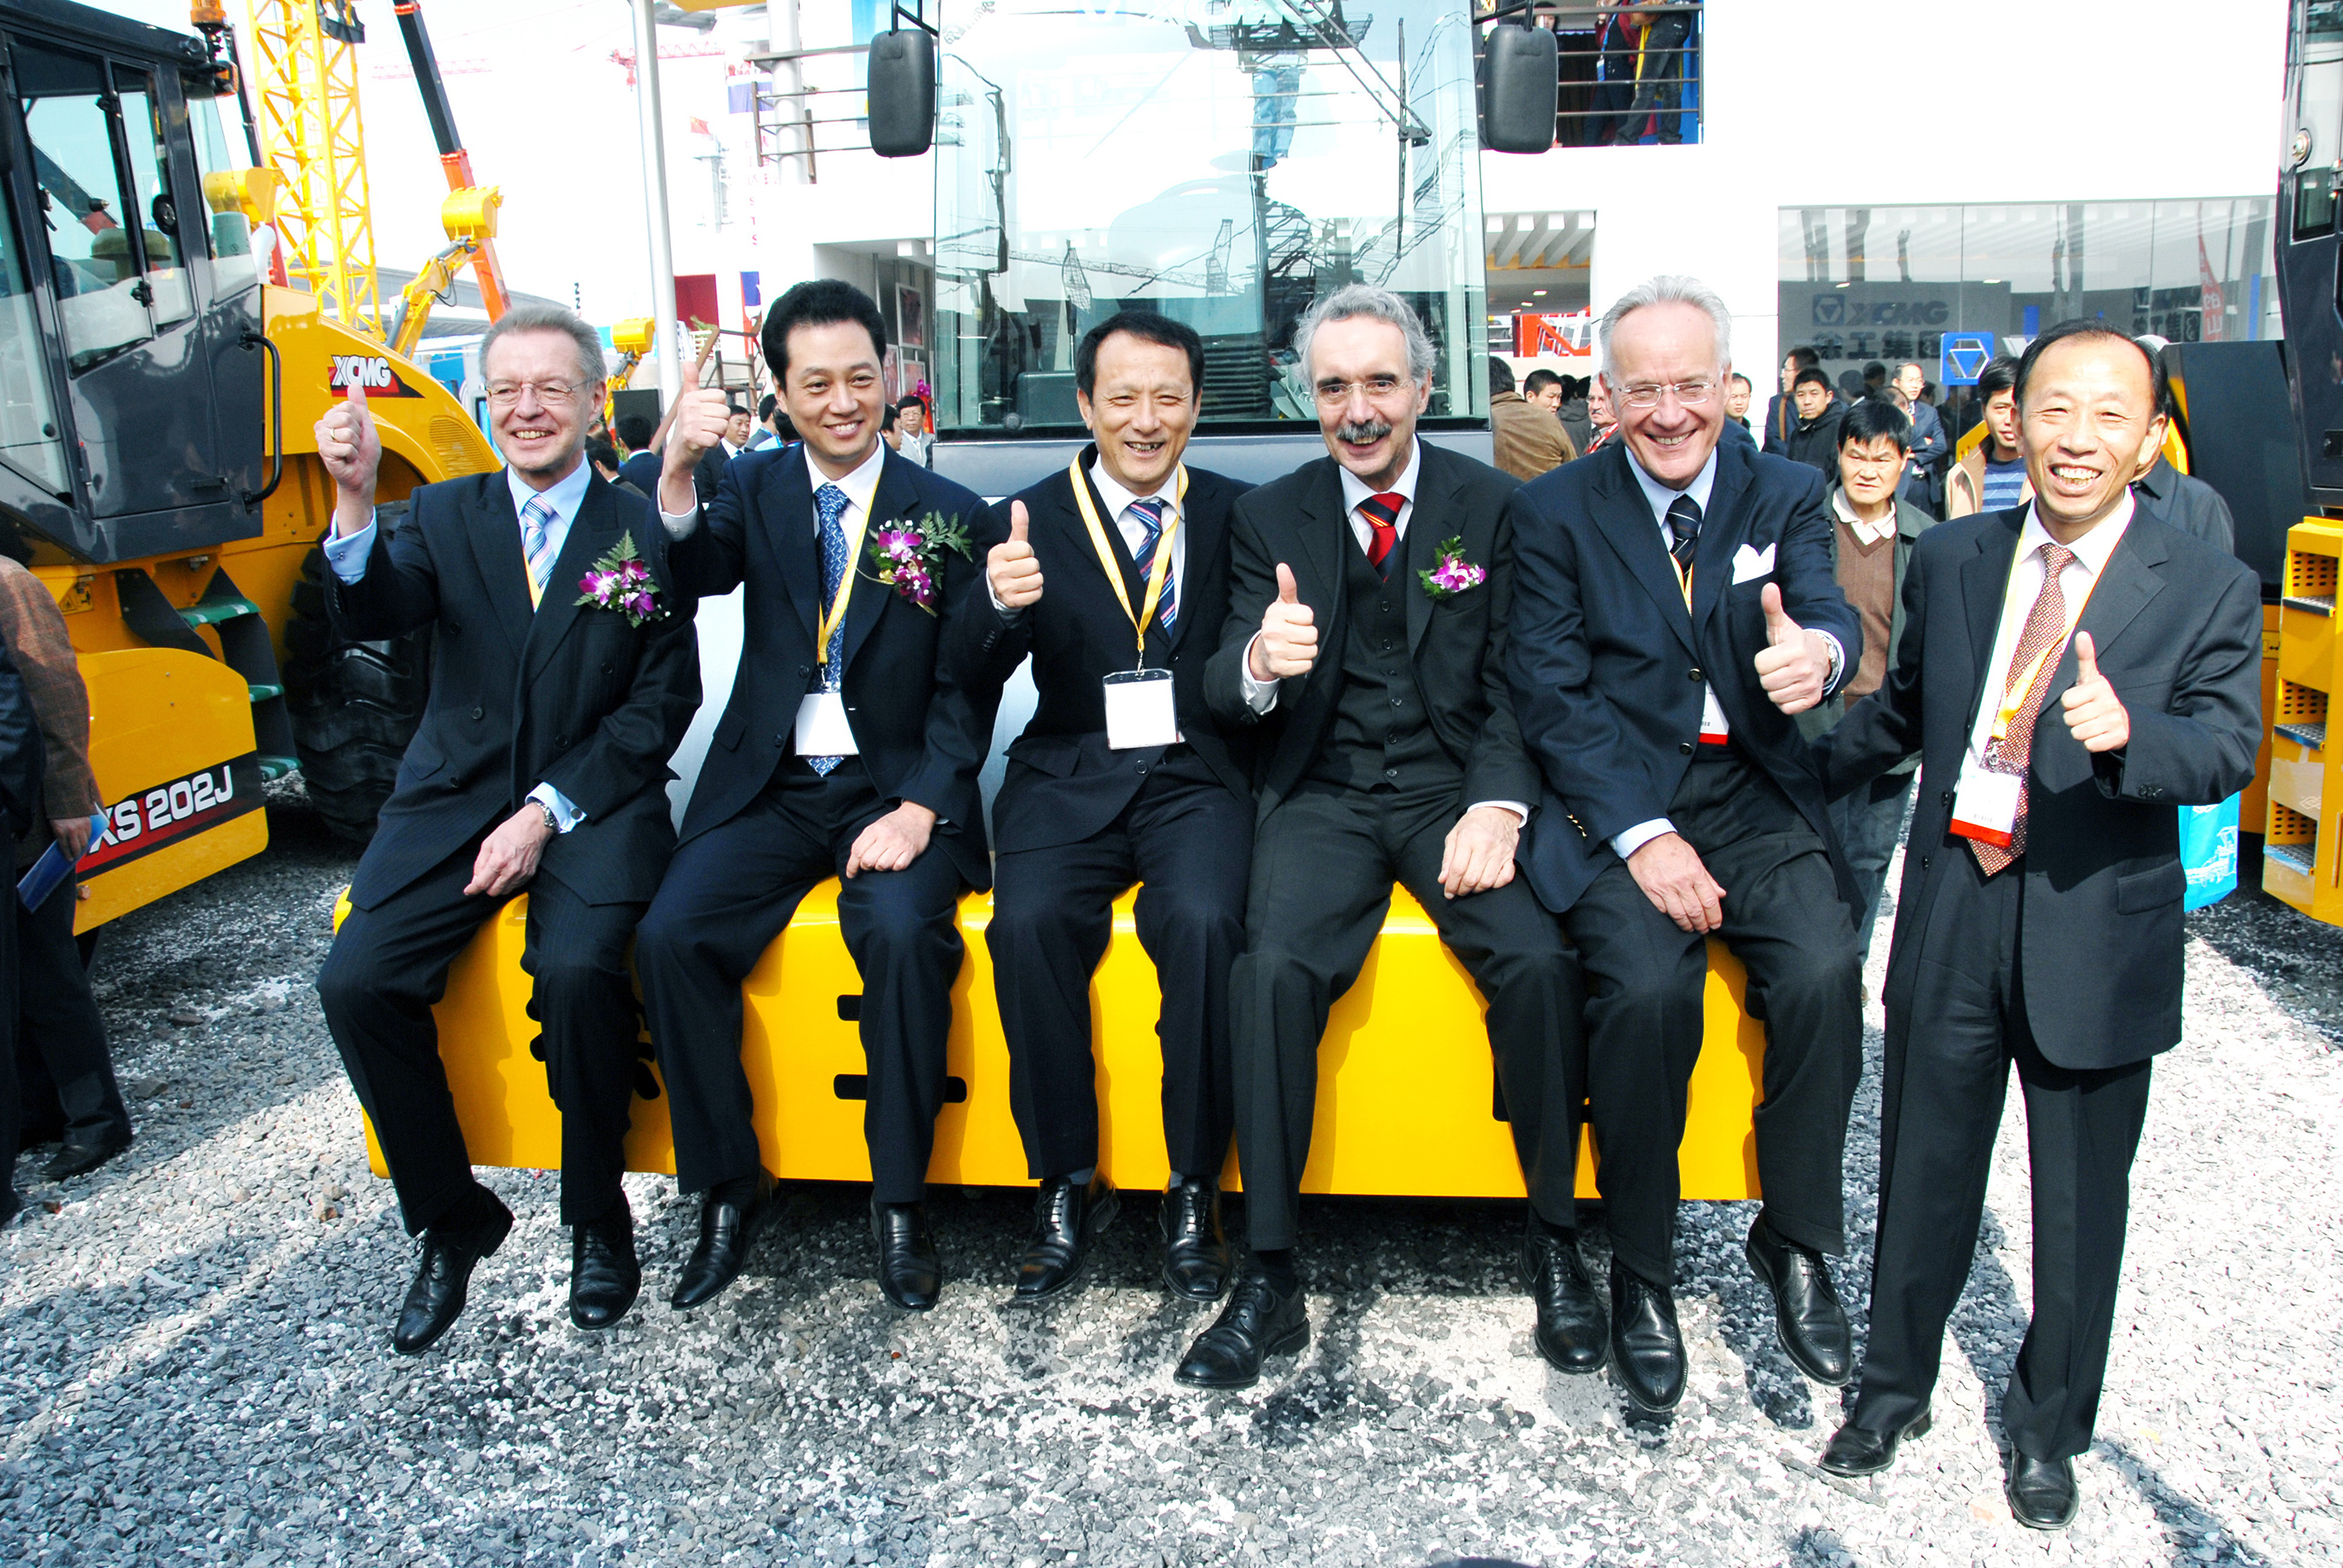 Wang Min, the Chairman of XCMG along with Global Partners at Trade show.